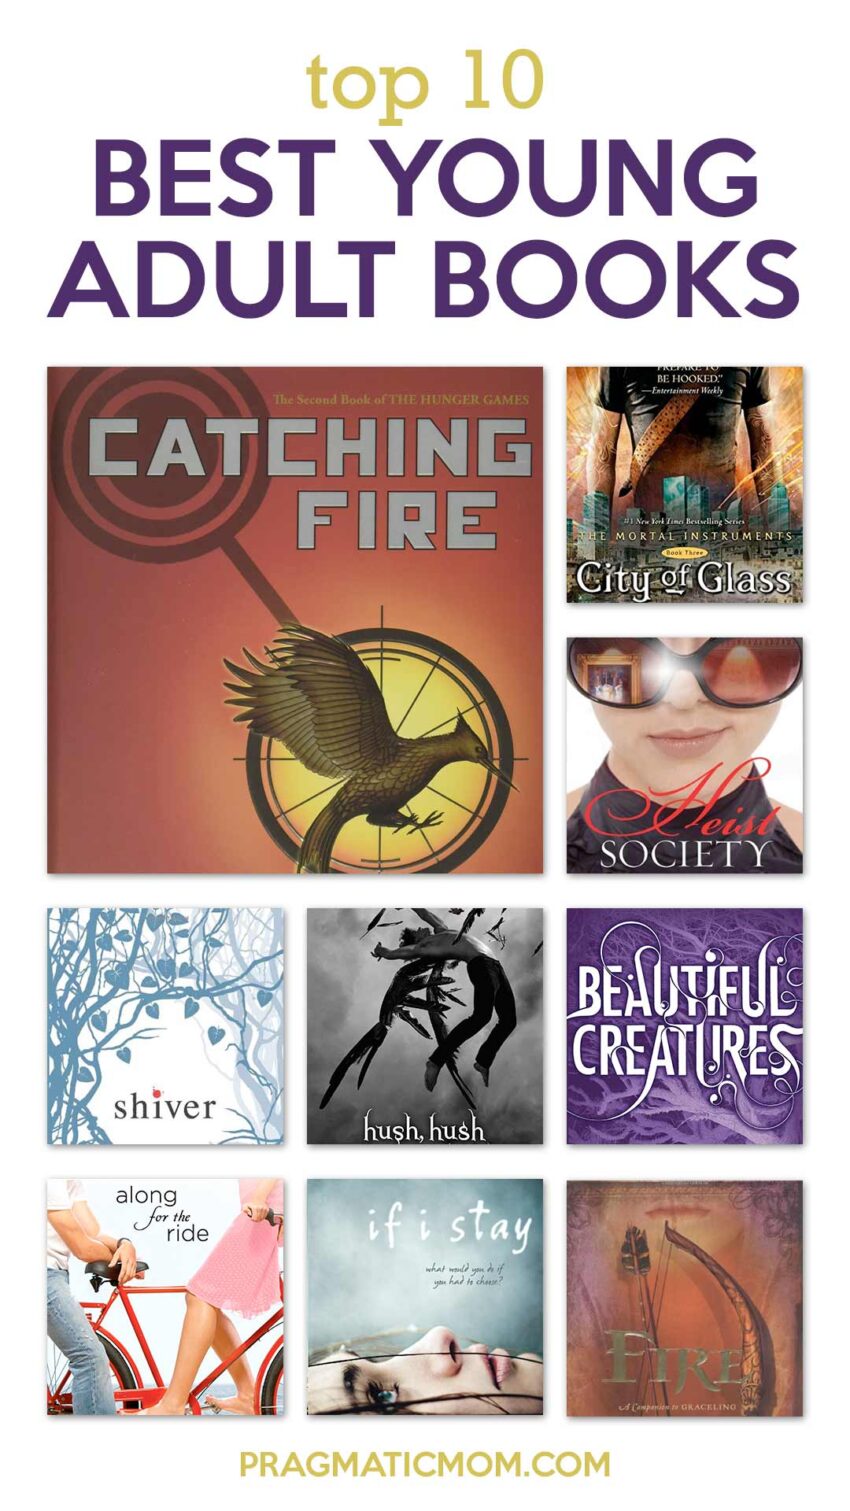 Top 10: Best Young Adult Books